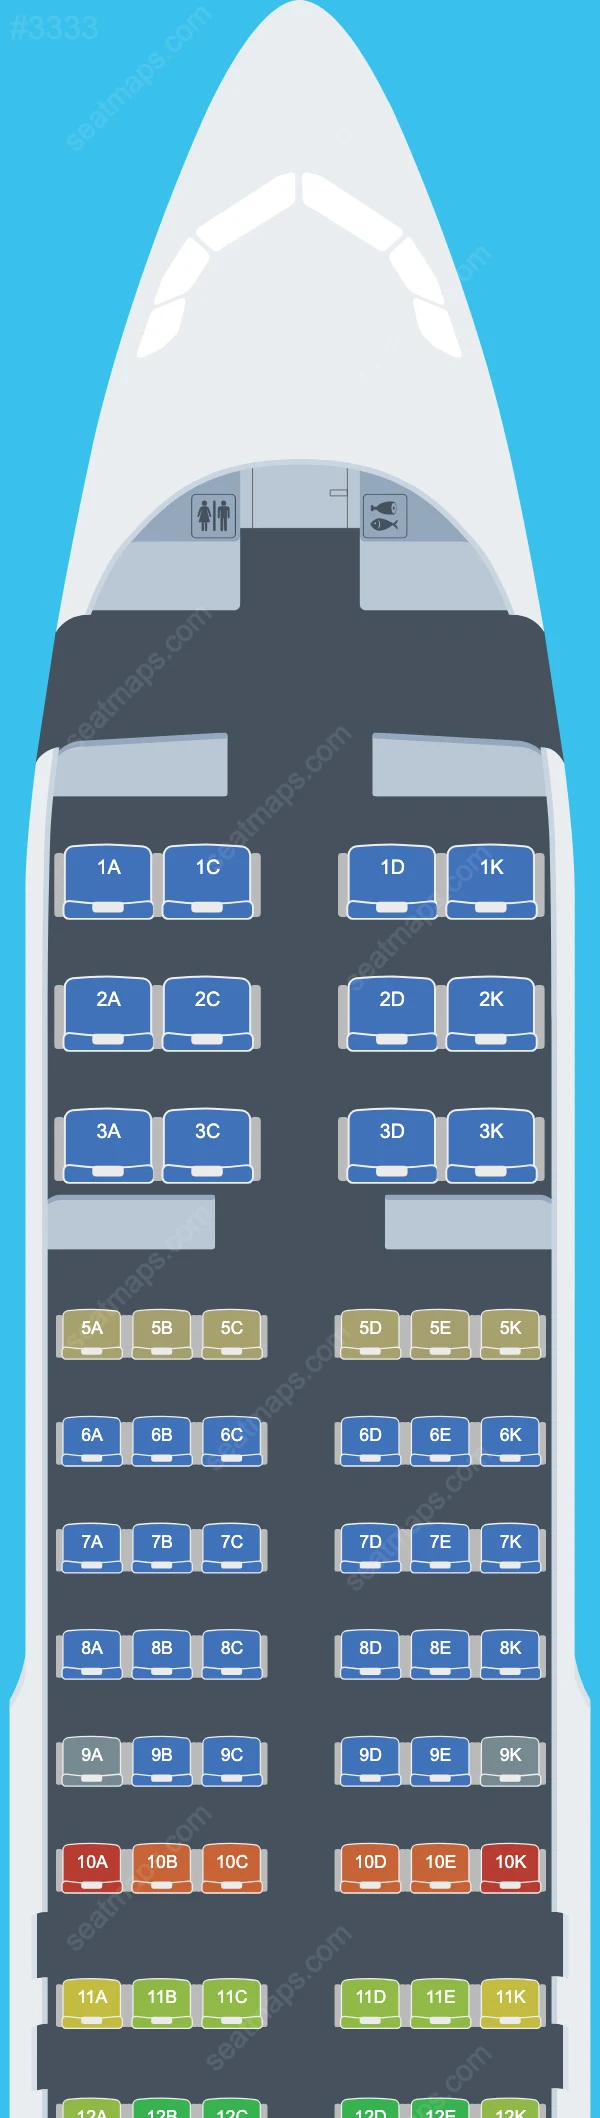 SriLankan Airlines Airbus A320 Seat Maps A320-200 V.2